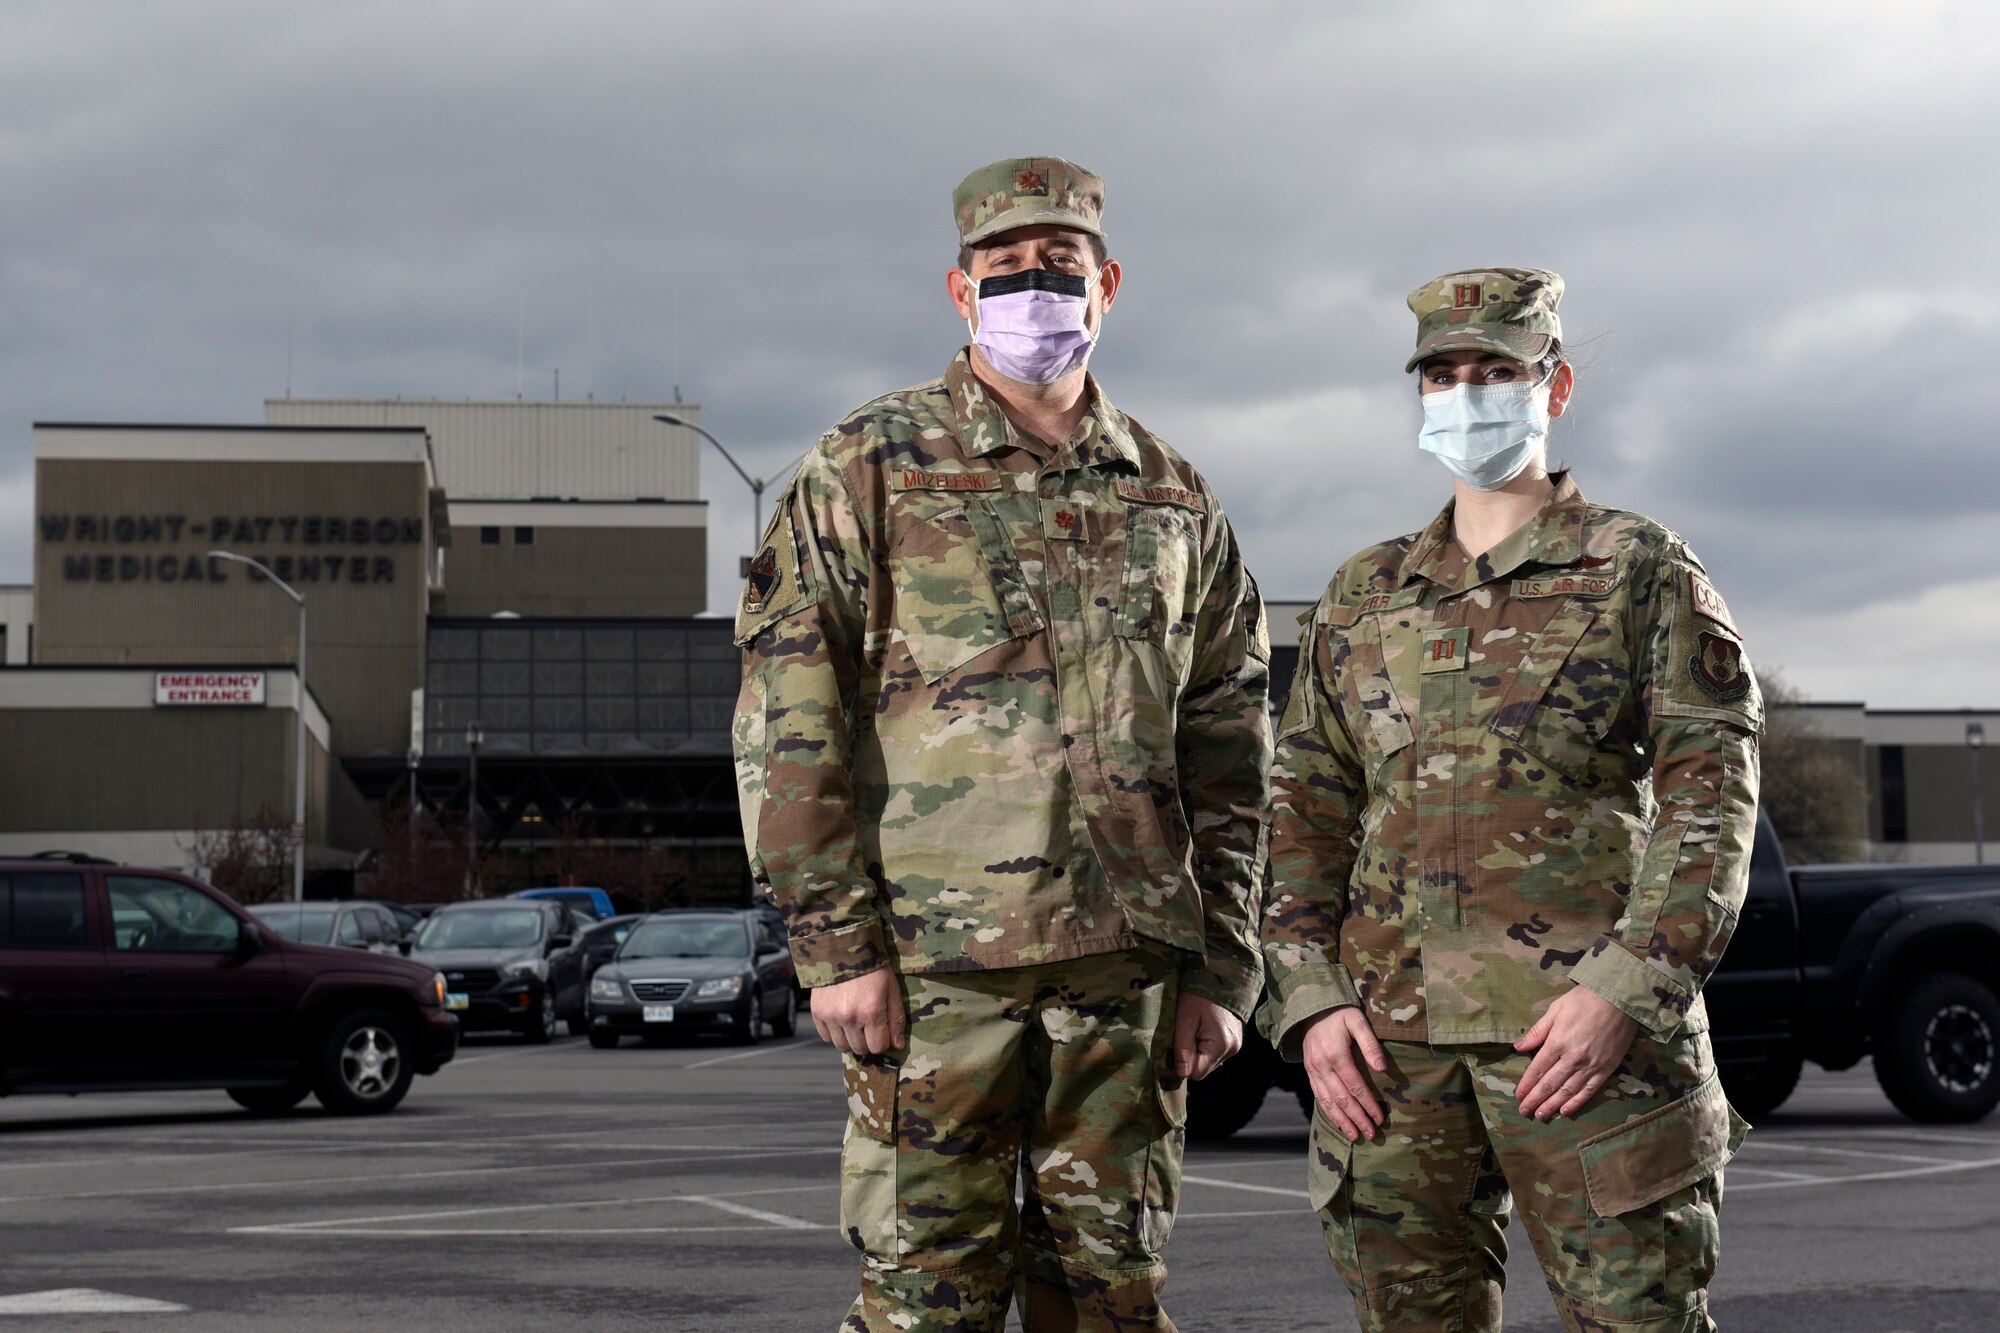 Air Force Maj. Eric Mozeleski, an emergency medicine physician with the 88th Medical Group, and Capt. Carly Kerr, a critical care nurse with 88 MDG, talk outside the Wright Patterson Air Force Base, Ohio, Medical Center on March 31, 2021. Both Mozeleski and Kerr became first responders on March 23 when they attended to rollover auto accident victims as they commuted to work at Wright-Patt. Mozeleski and Kerr stabilized two victims and waited for emergency services to arrive. (U.S. Air Force photo by Ty Greenlees)